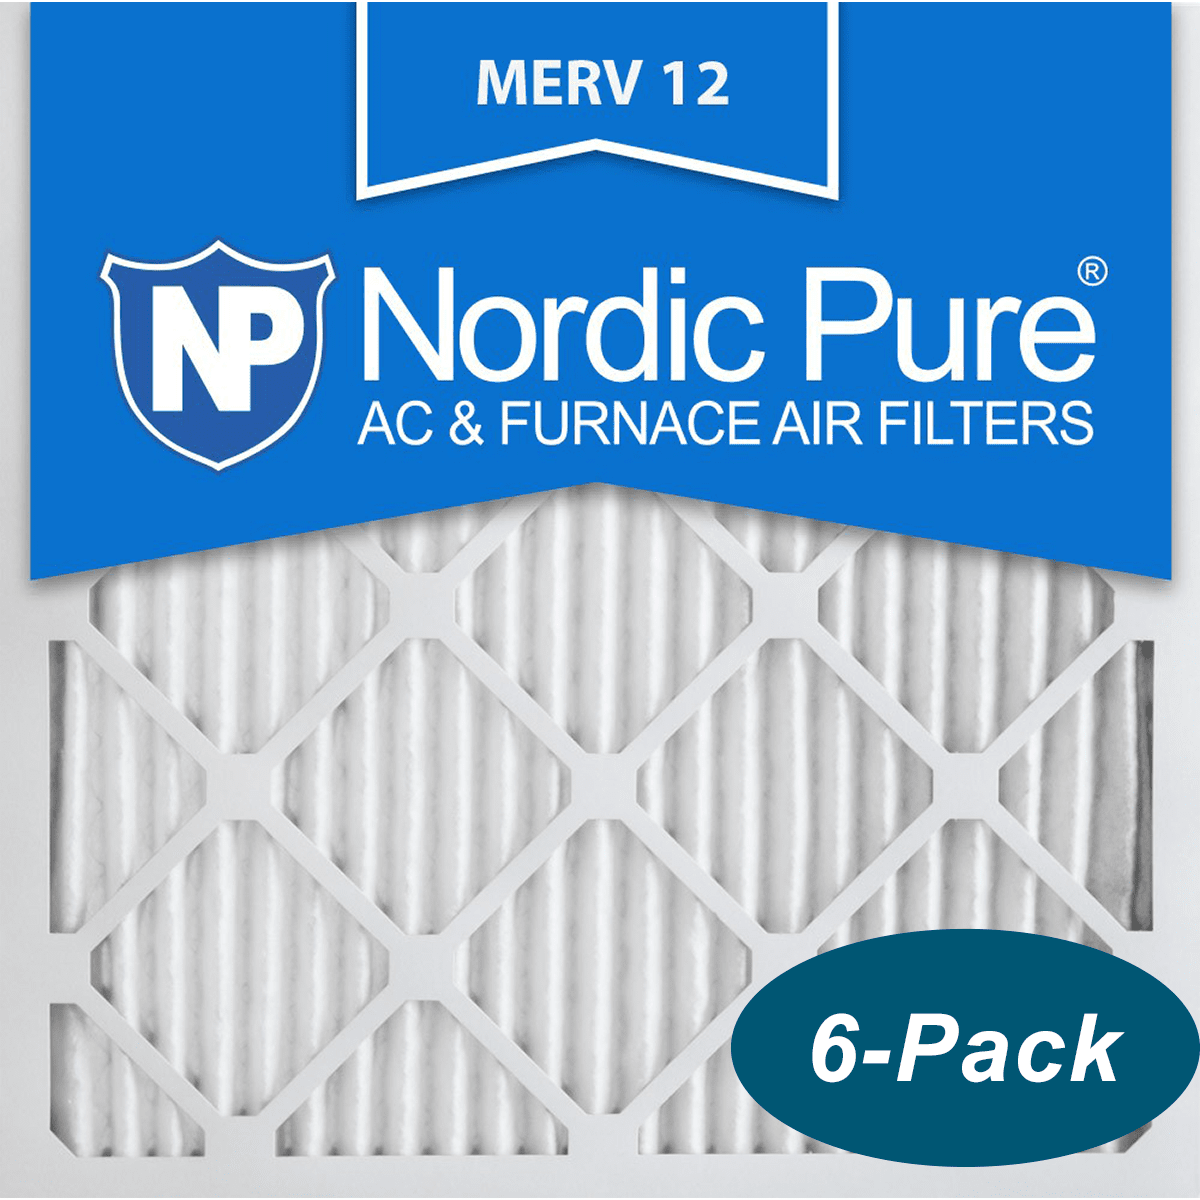 Nordic Pure MERV 12 Pleated Furnace Filter 20x20x1 6-Pack (20x20x1M12-6)